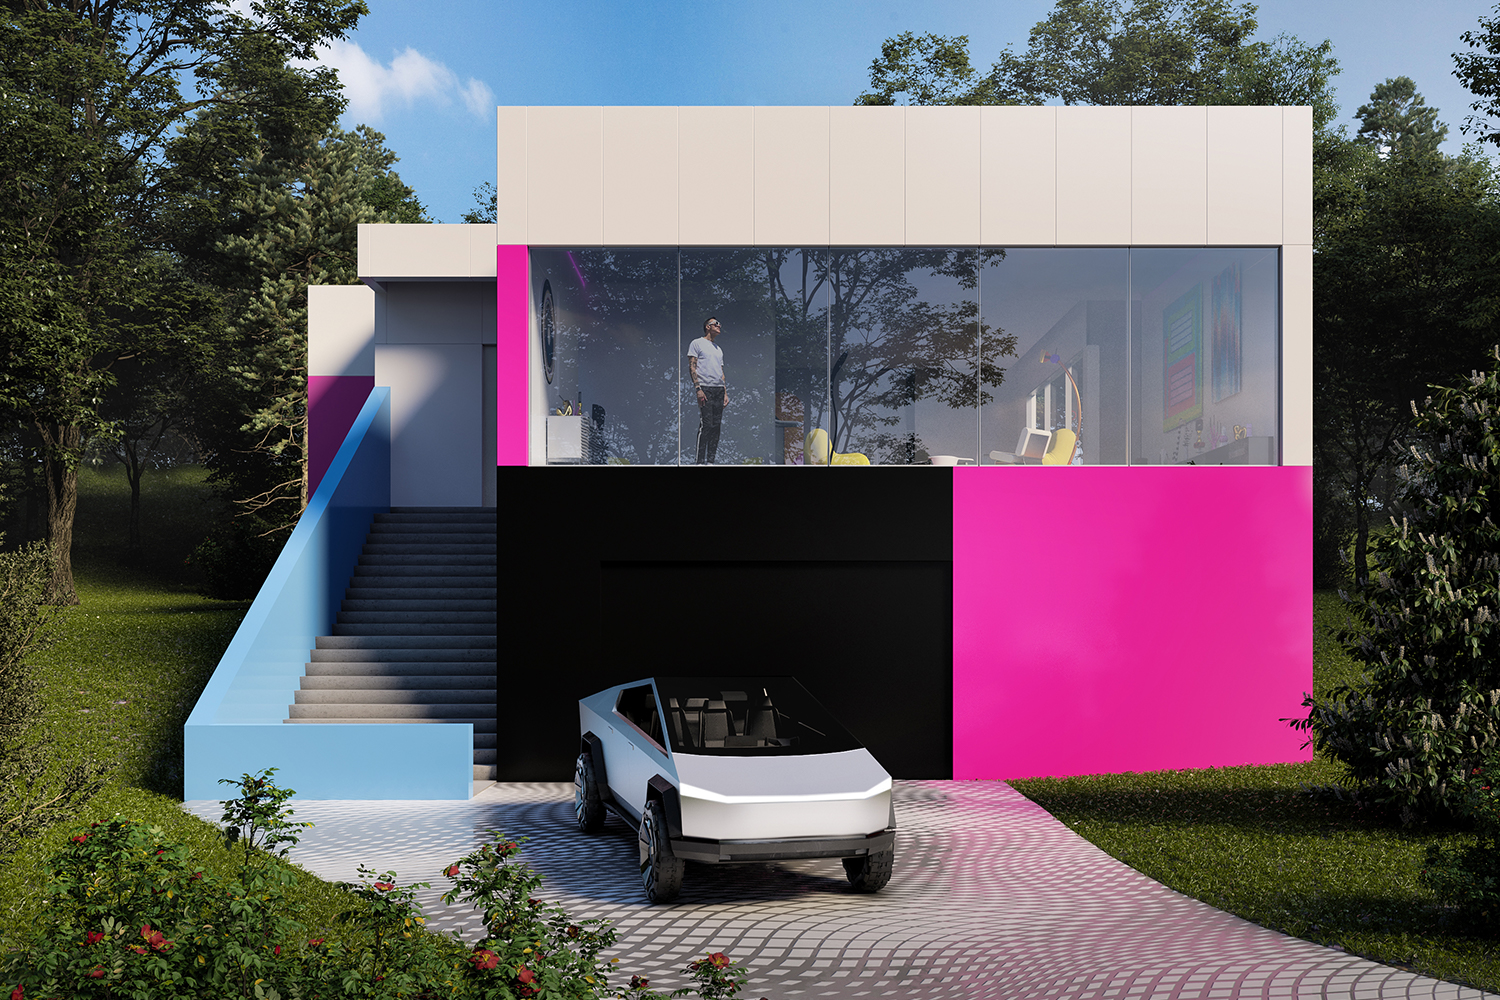 A rendering of Karim Rashid's home that he's building for himself, with a Tesla Cybertruck out front